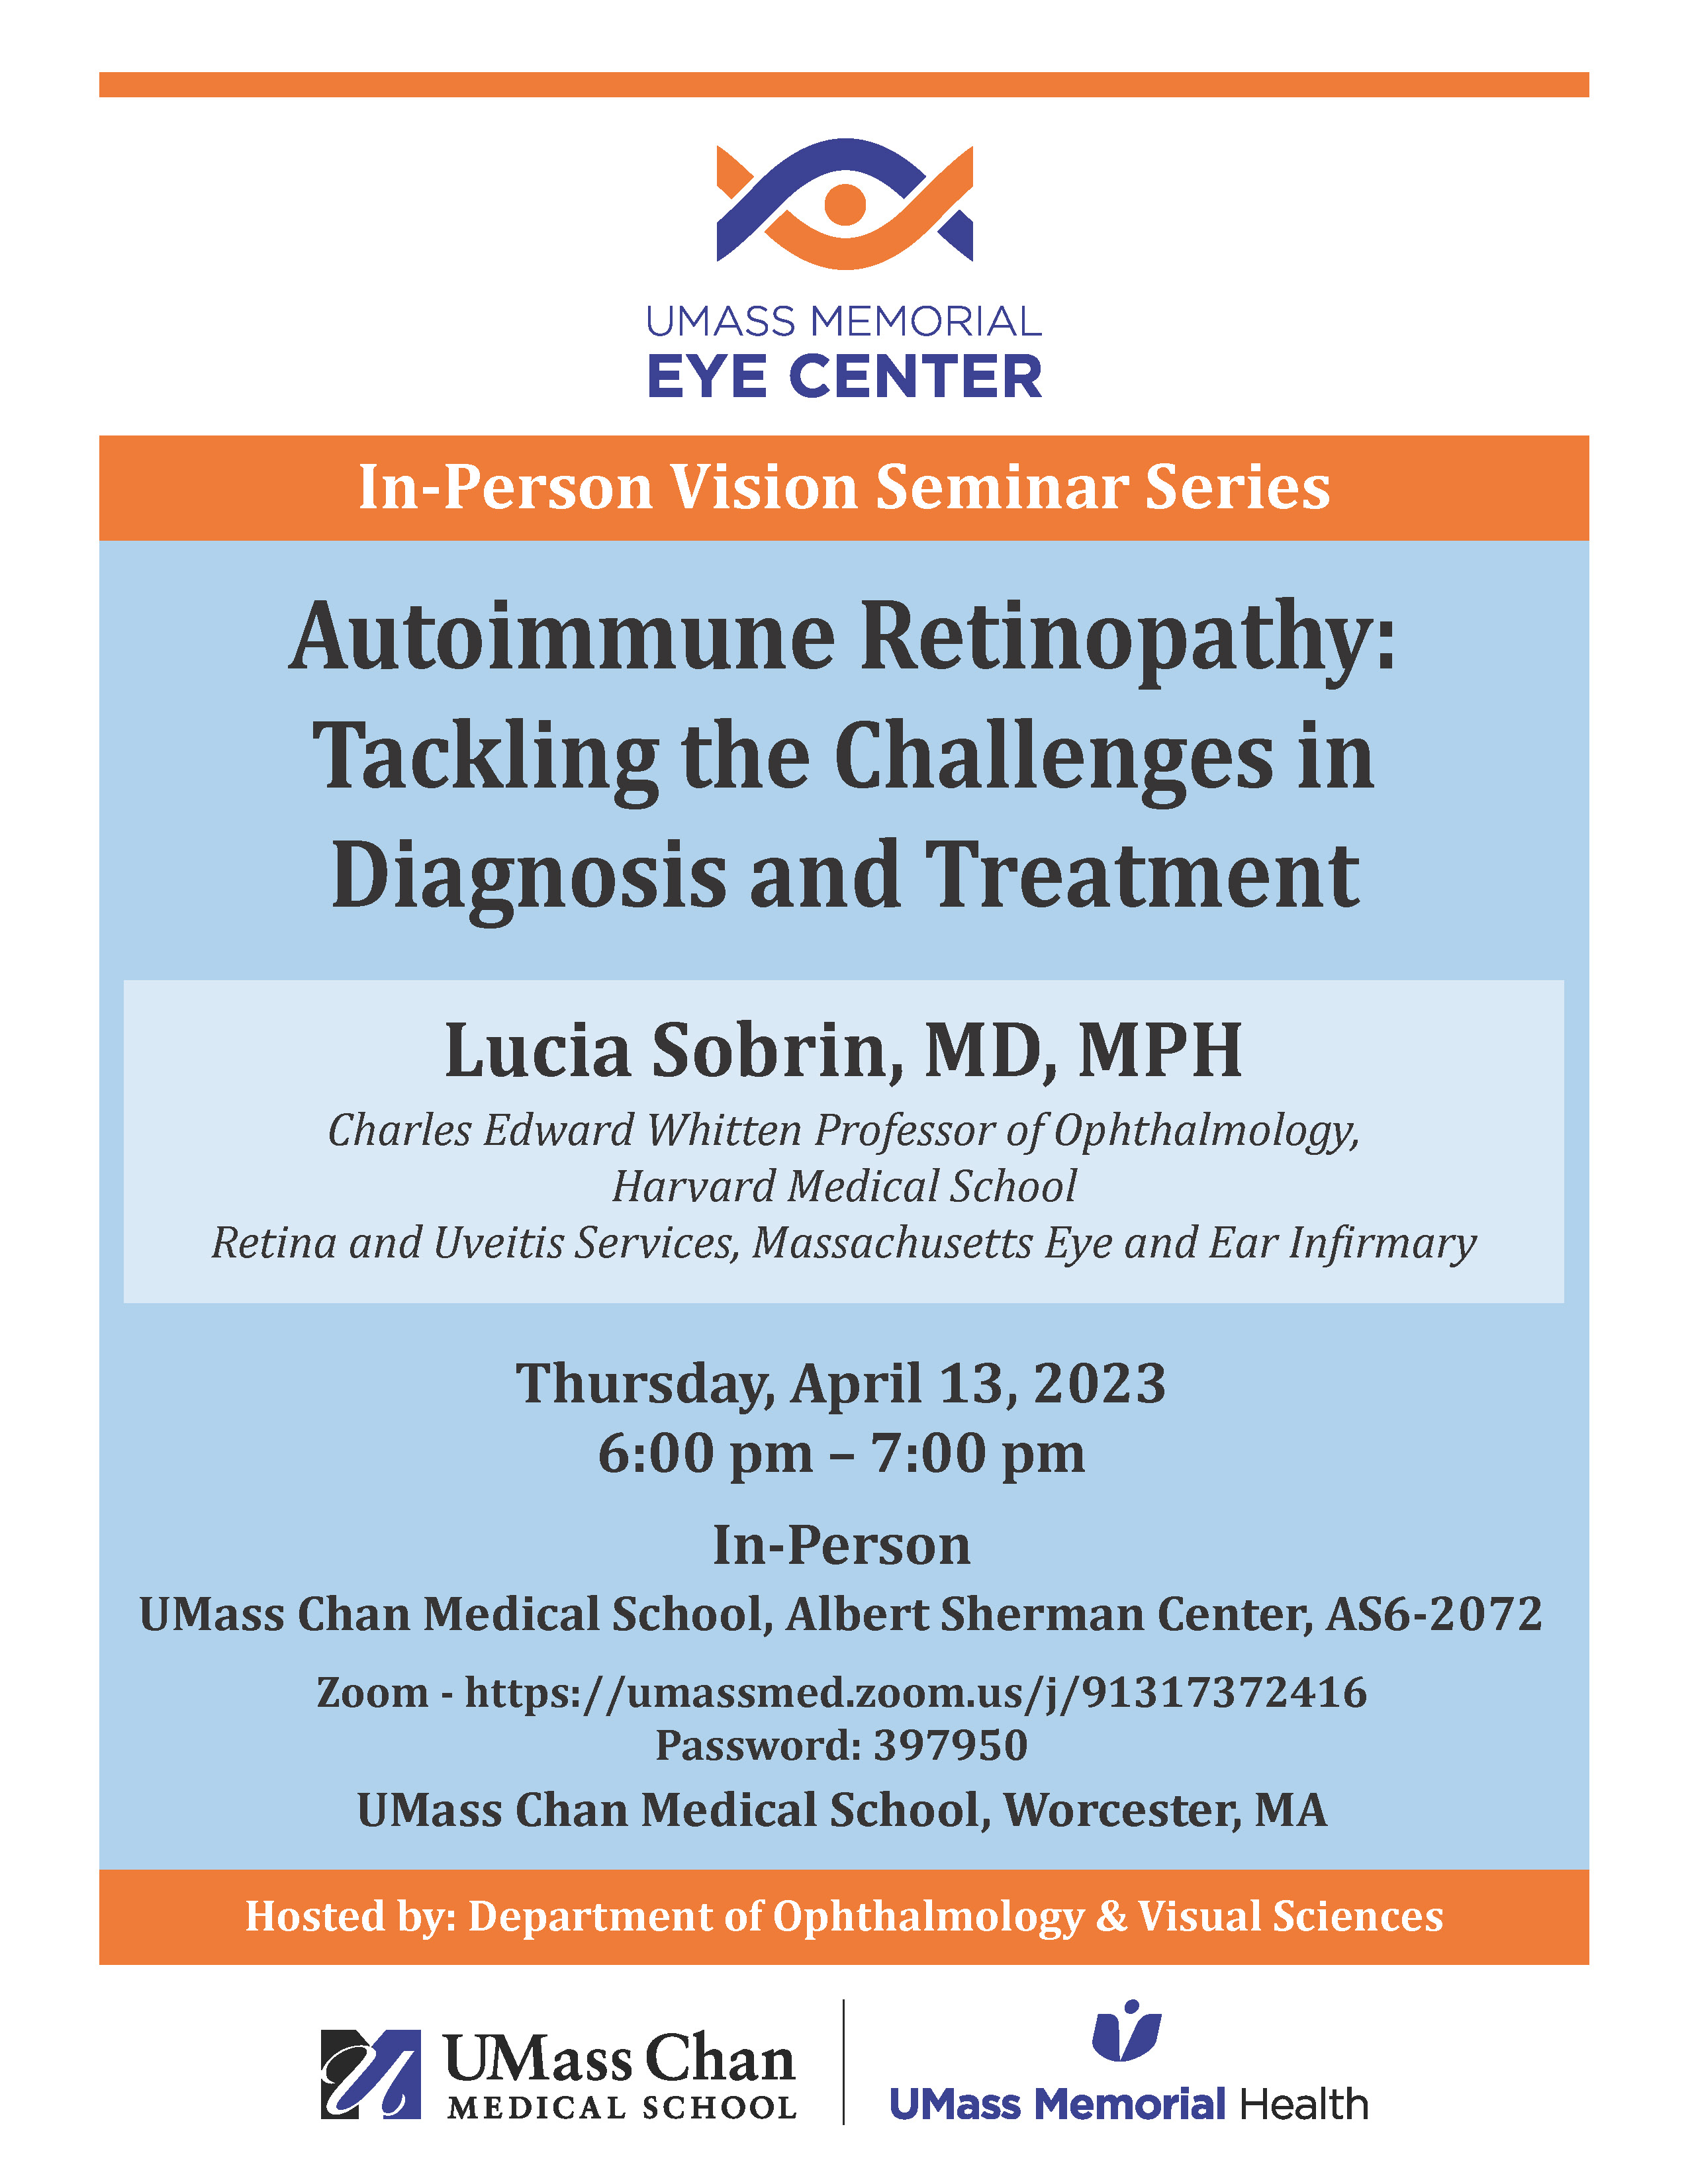 Autoimmune Retinopathy: Tackling the Challenges in Diagnosis and Treatment